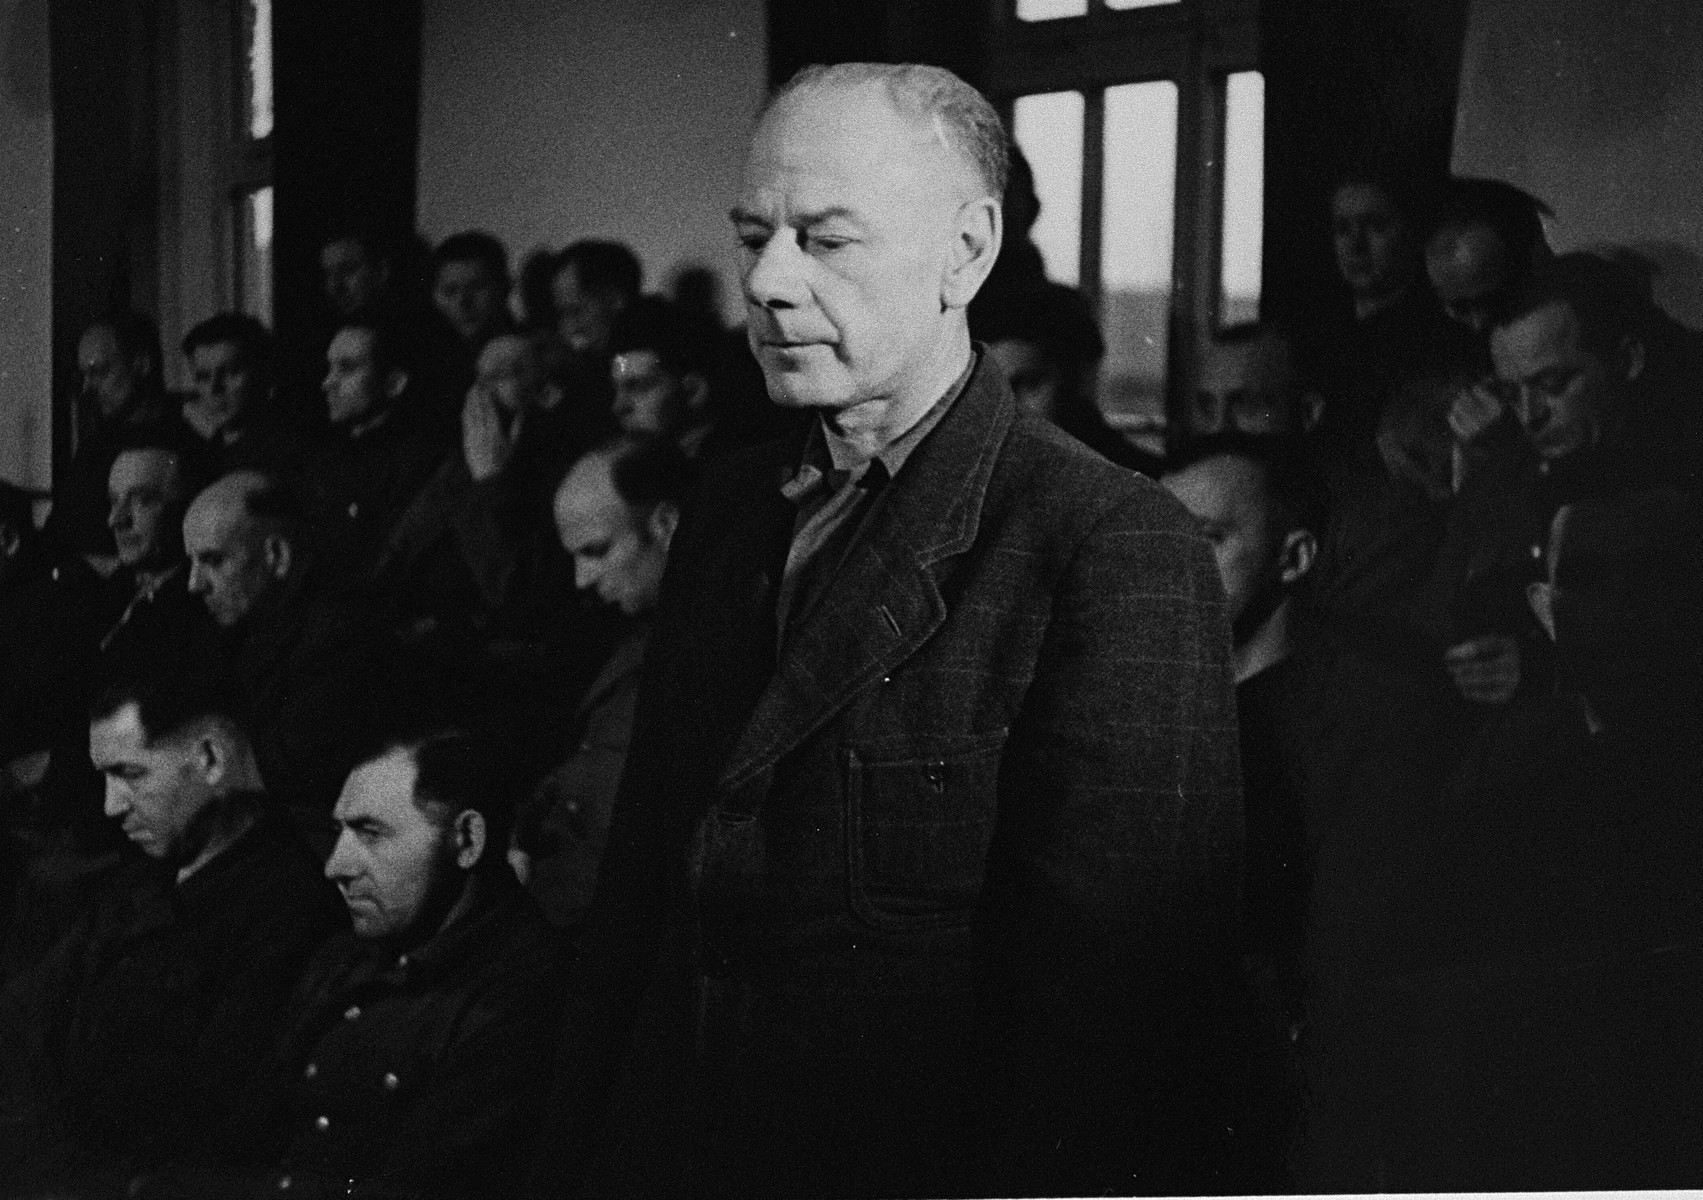 Dr. Eduard Krebsbach, a defendant at the trial of 61 former camp personnel and prisoners from Mauthausen, stands in his place in the defendants' dock.